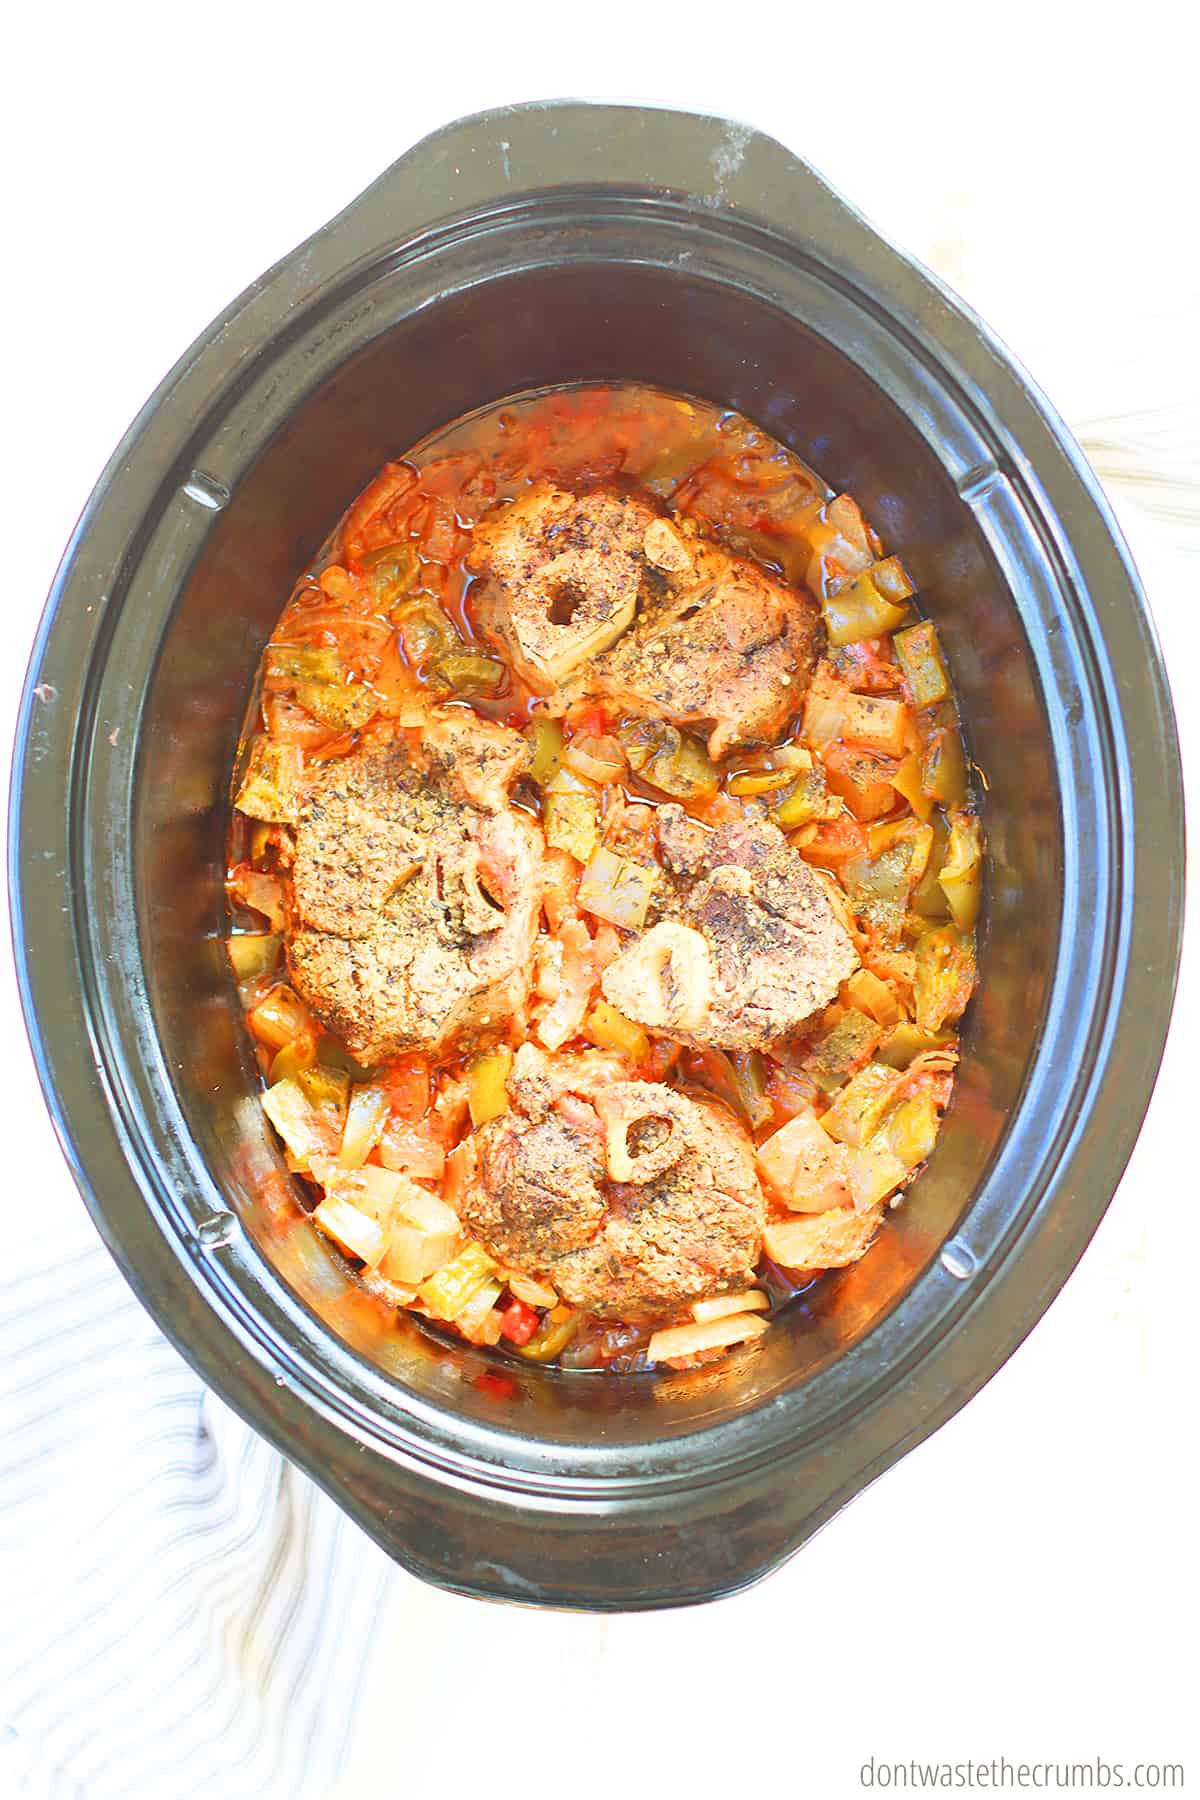 Fully cooked and ready to serve slow cooker osso buco is a wonder classic Italian recipe your whole family will enjoy. Garnish with freshly chopped parsley upon serving. 